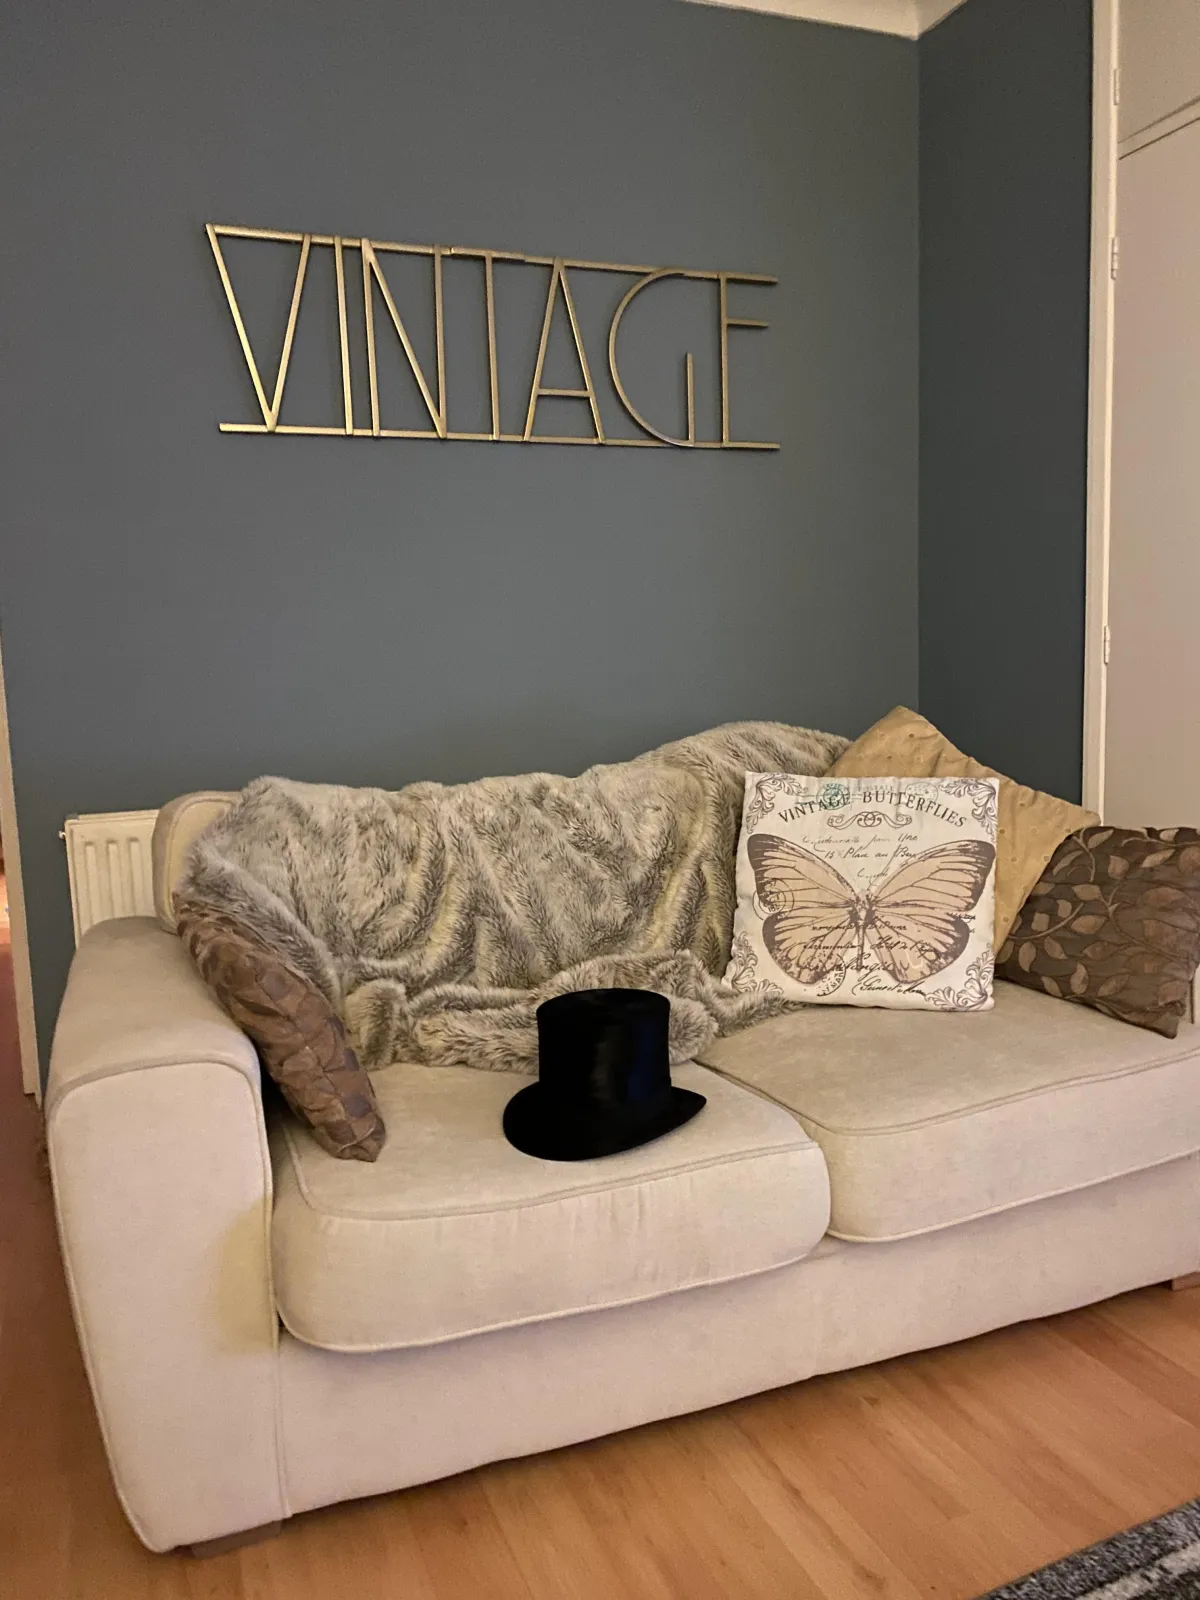 Squidgy sofa with cushions and faux fur blanket